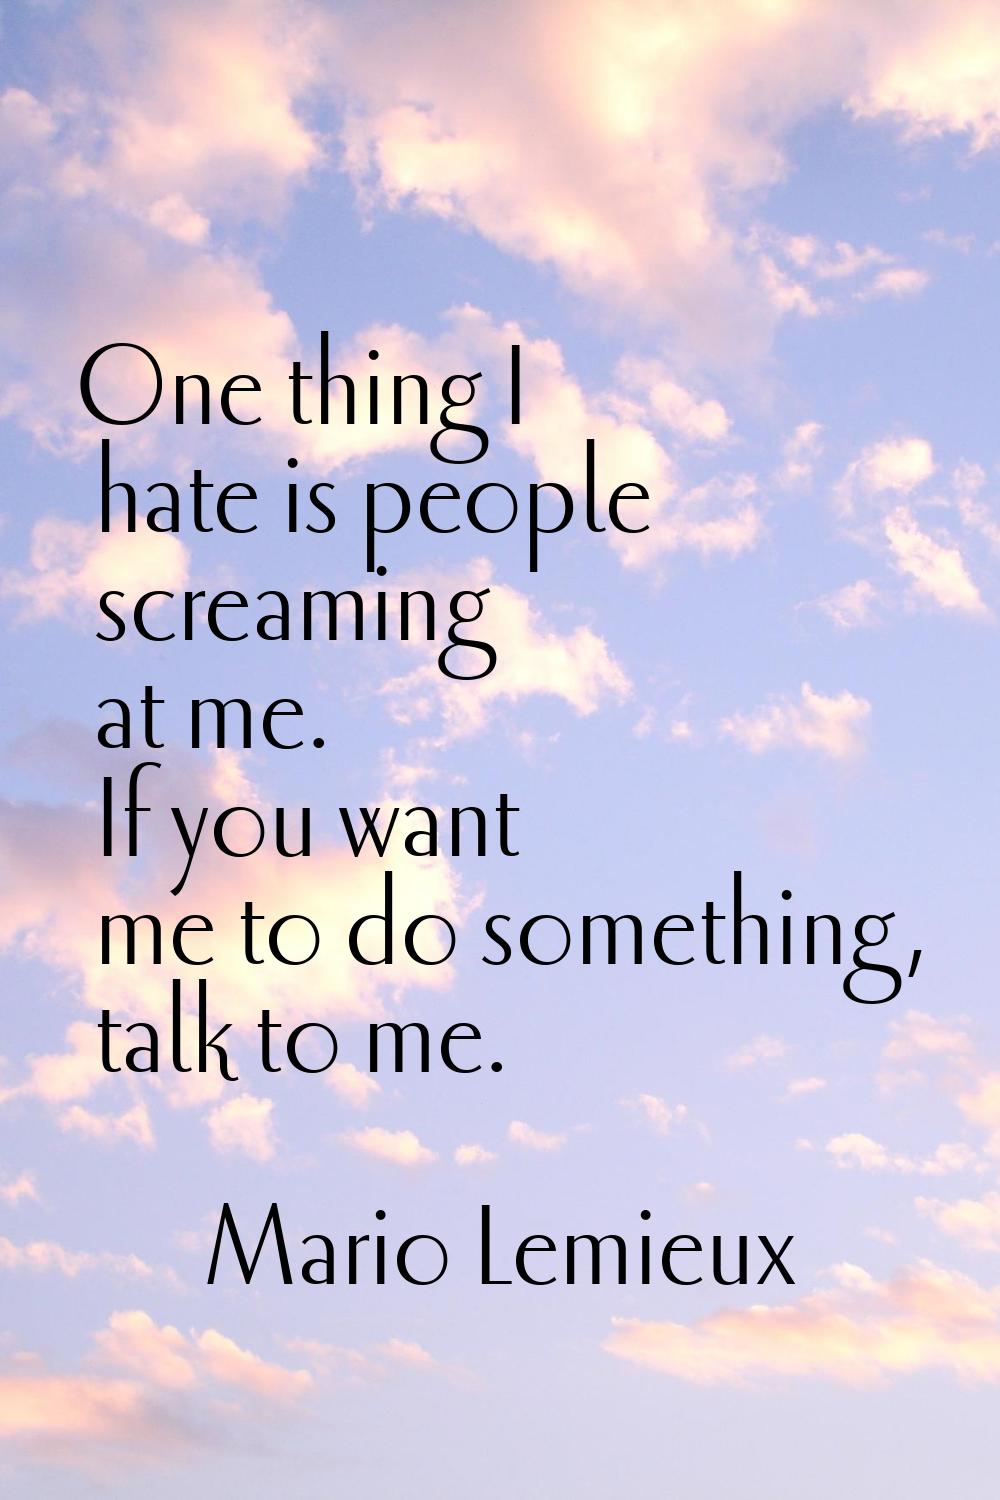 One thing I hate is people screaming at me. If you want me to do something, talk to me.